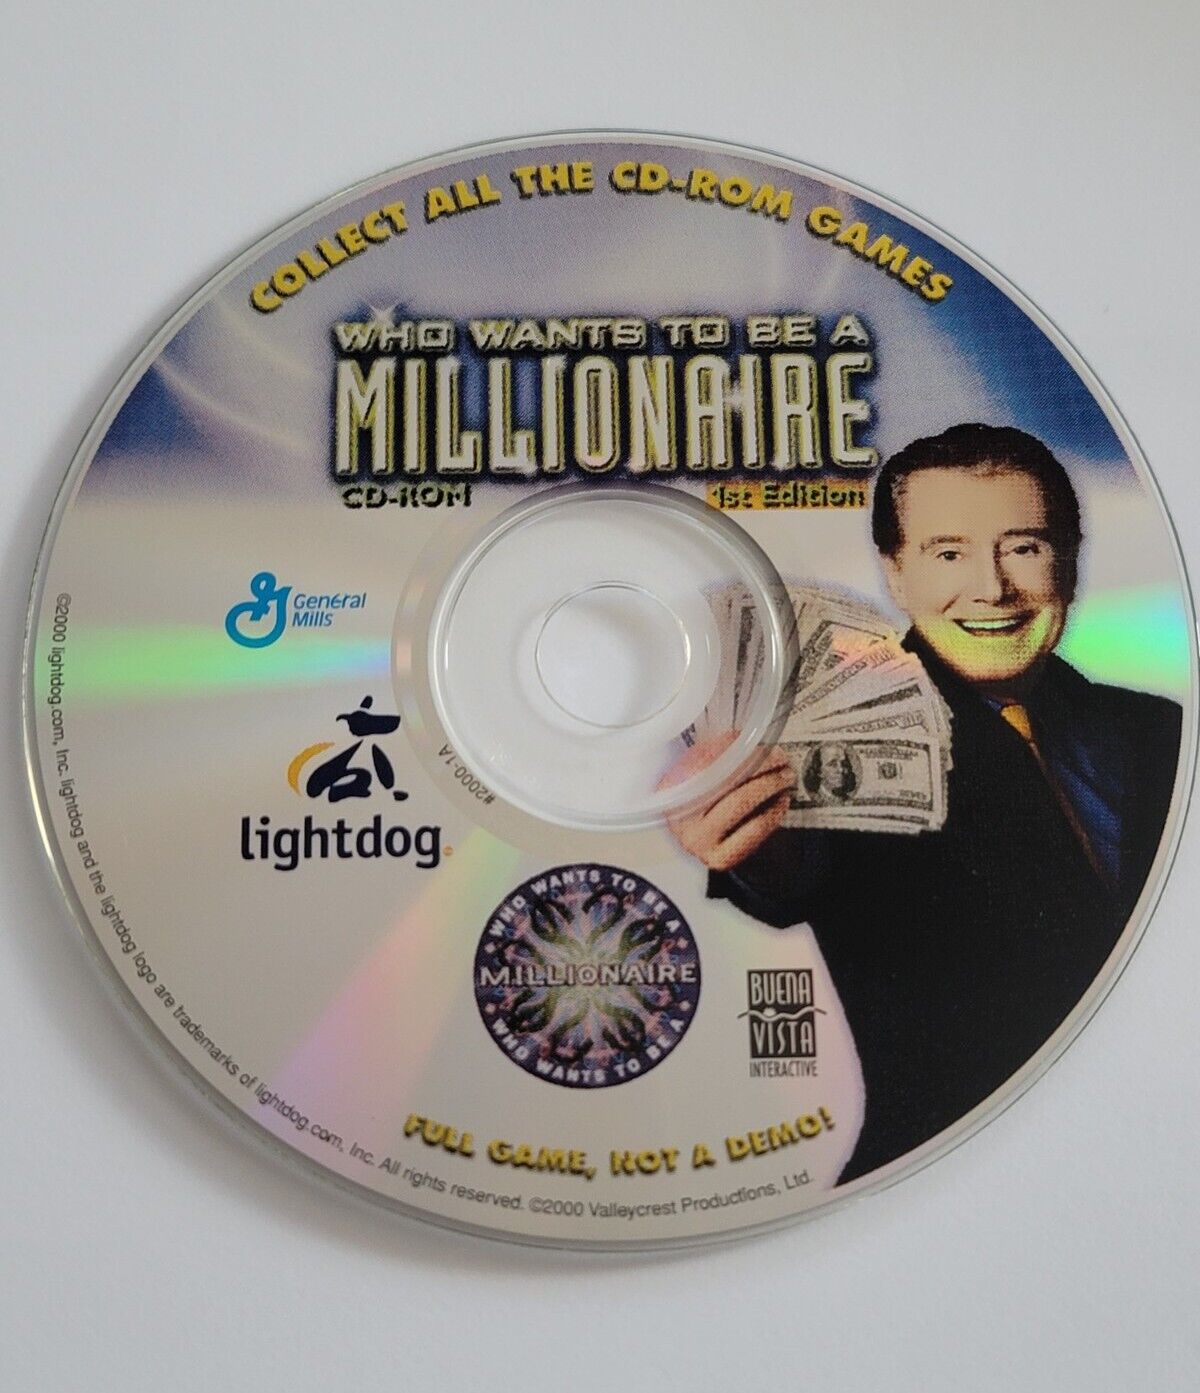 Who Wants To Be A Millionaire Full Version CD ROM PC Game General Mills Lightdog